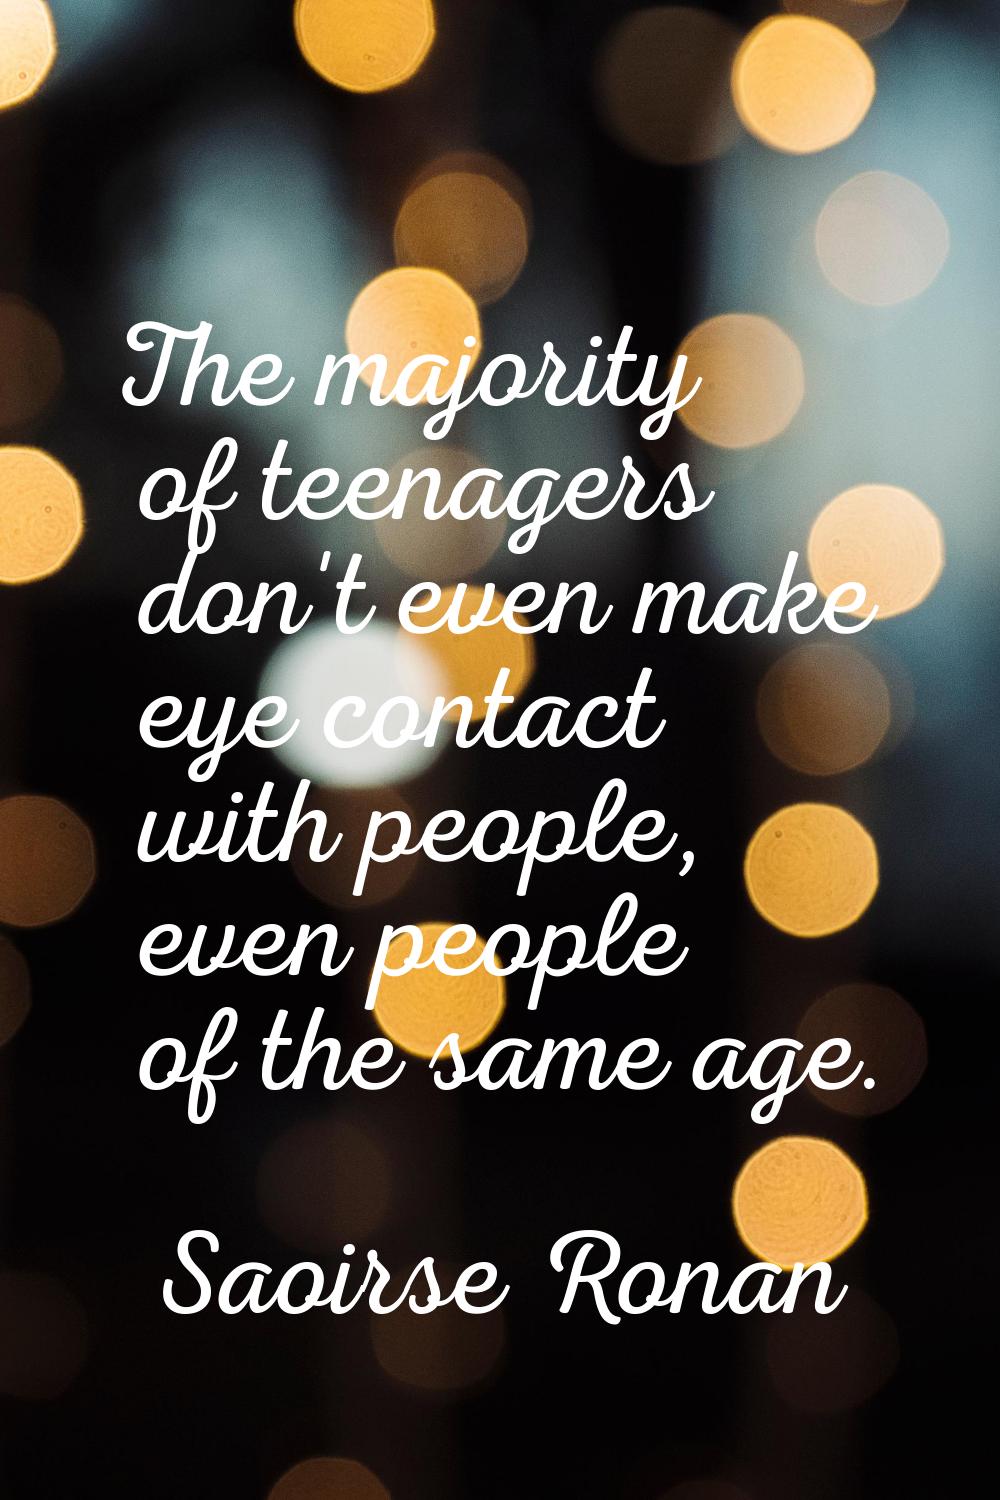 The majority of teenagers don't even make eye contact with people, even people of the same age.